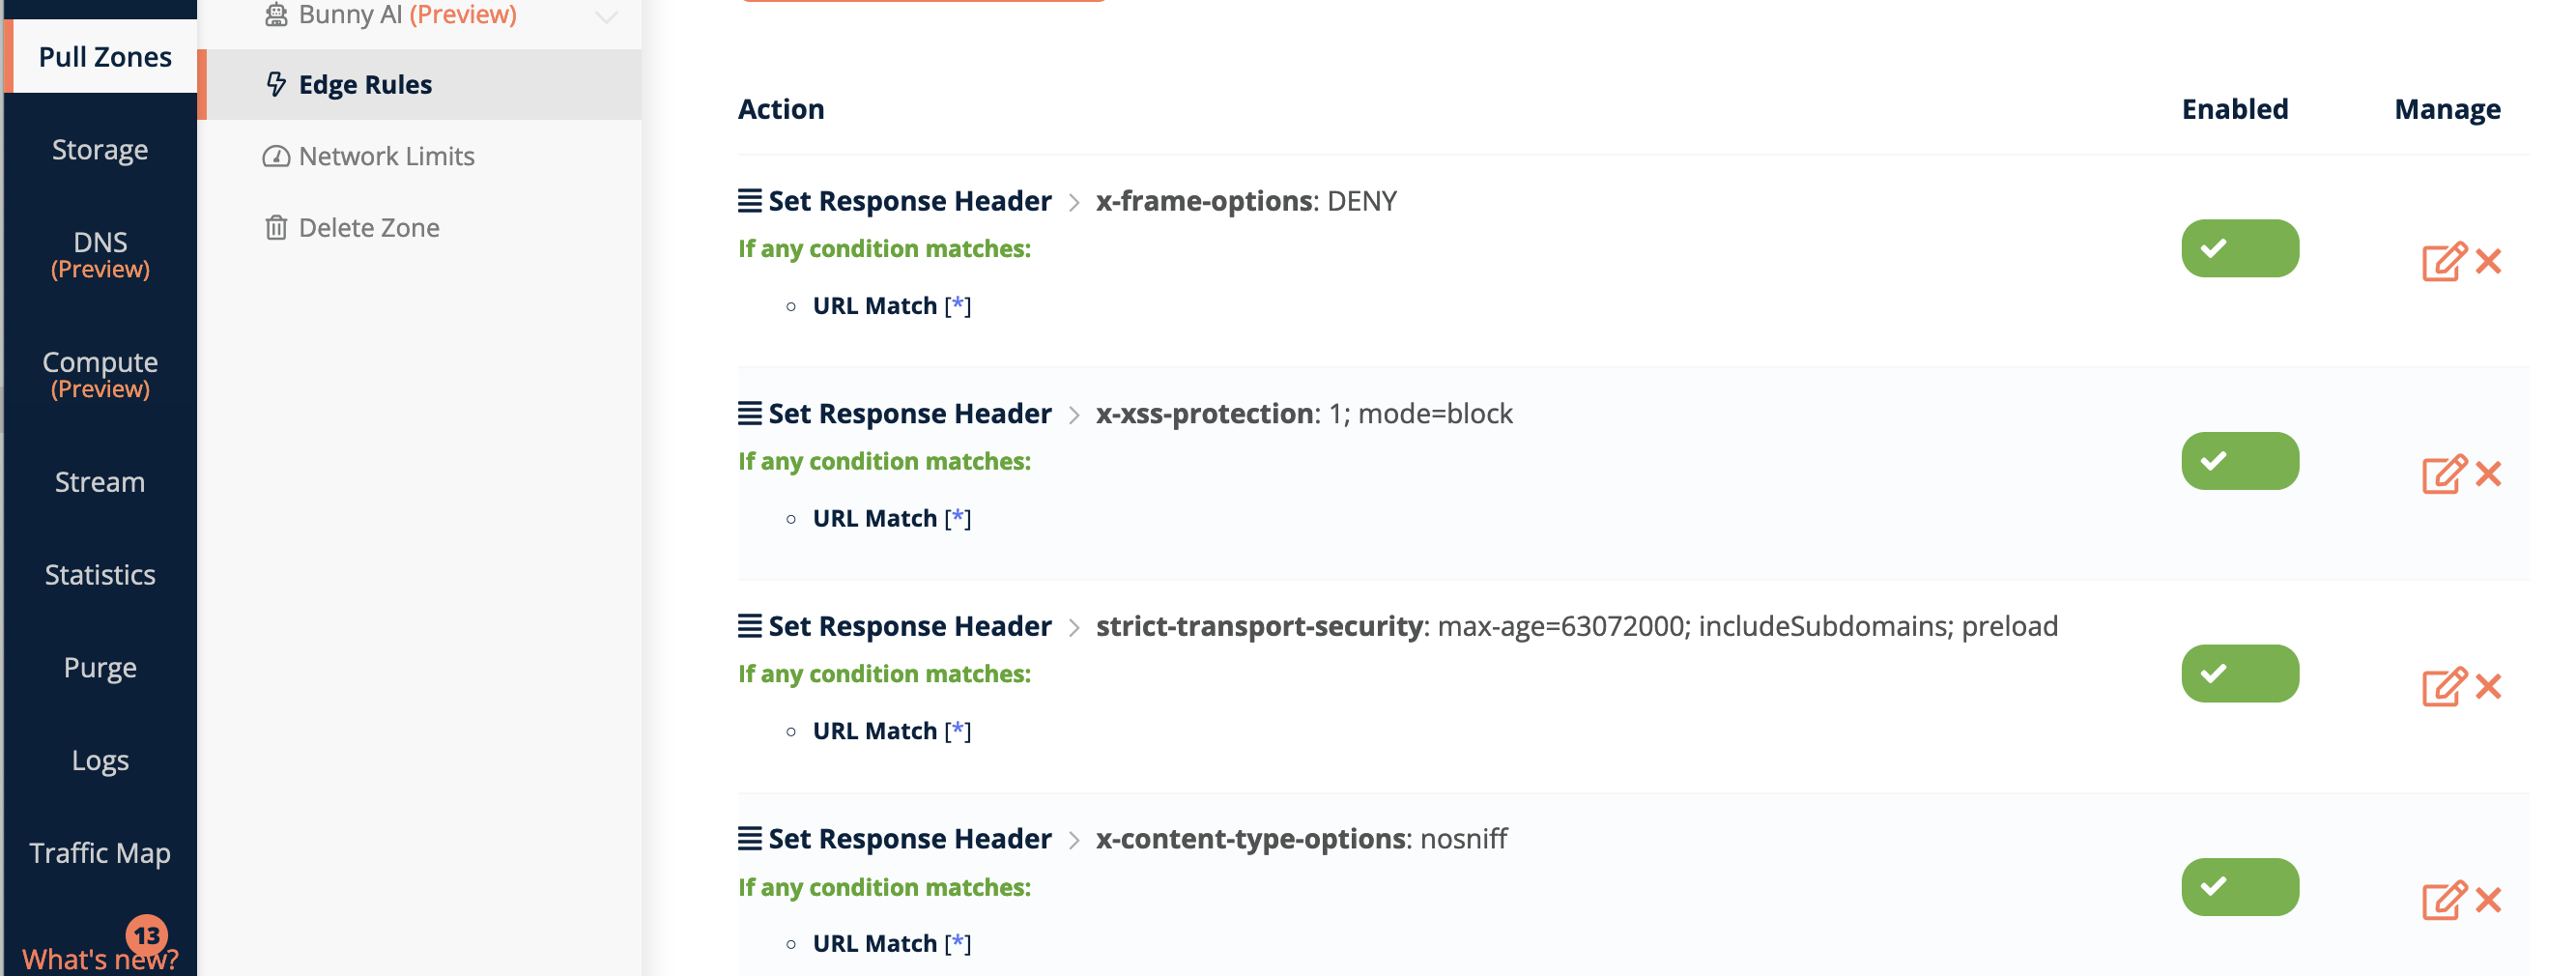 Bunny console listing security headers set on a Pull Zone